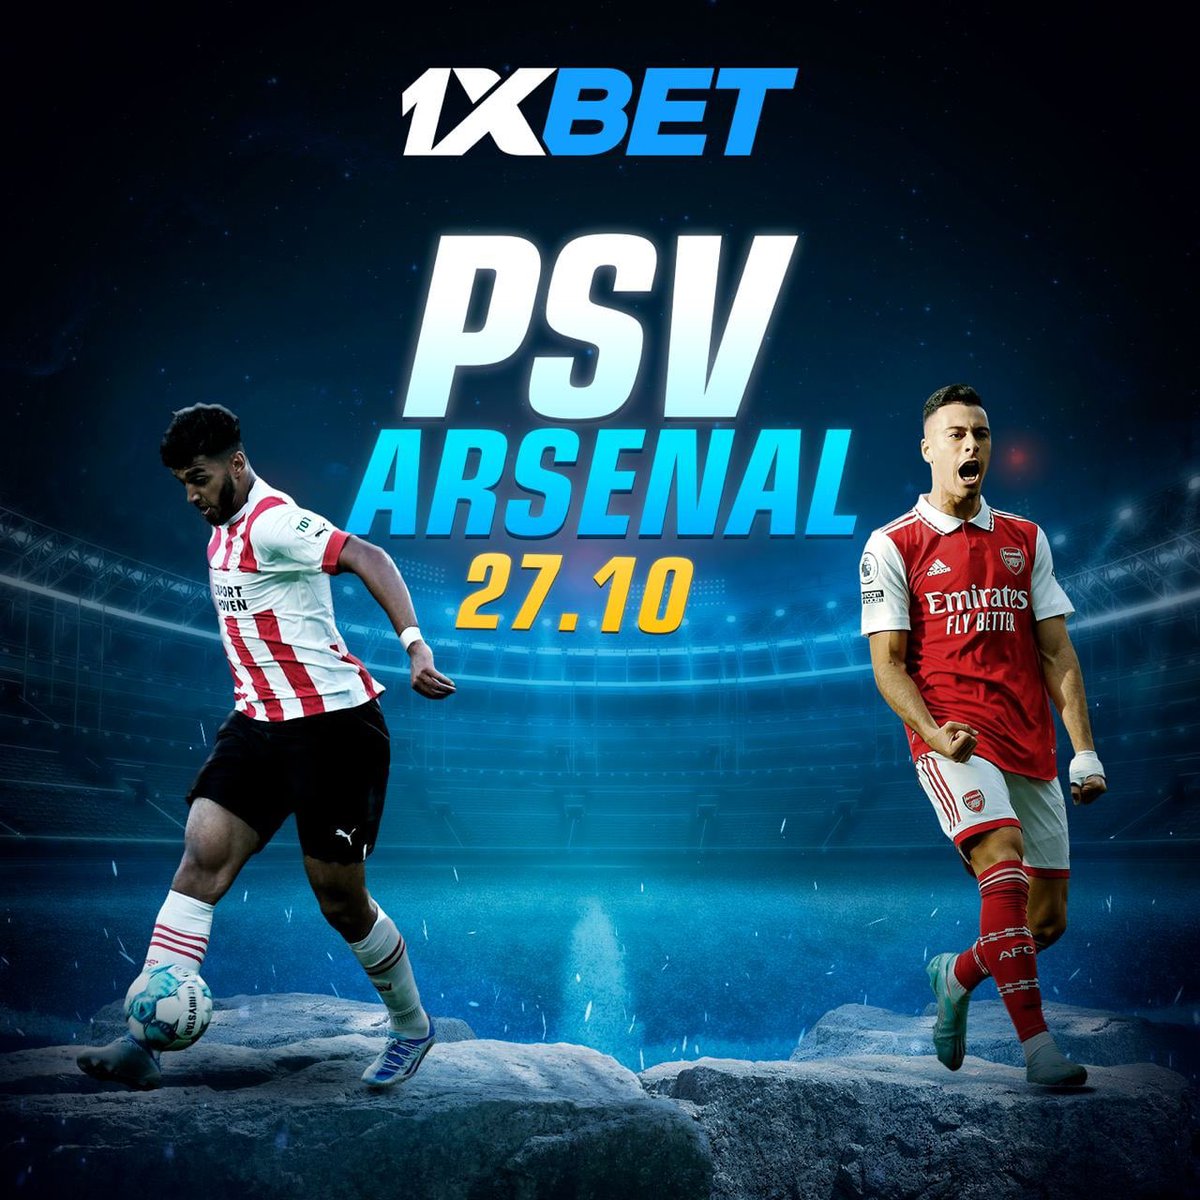 Catch up with exciting duels in UEL this week as PSV and Arsenal lock horns, while group G leaders, Freiburg faces-off Olympiacos. You can earn 300% welcome bonus when you bet on this and other UEL matches on 1xBet. REGISTER HERE ⬇️ bit.ly/3rNnr33 Promo code: ‘IMUSS’